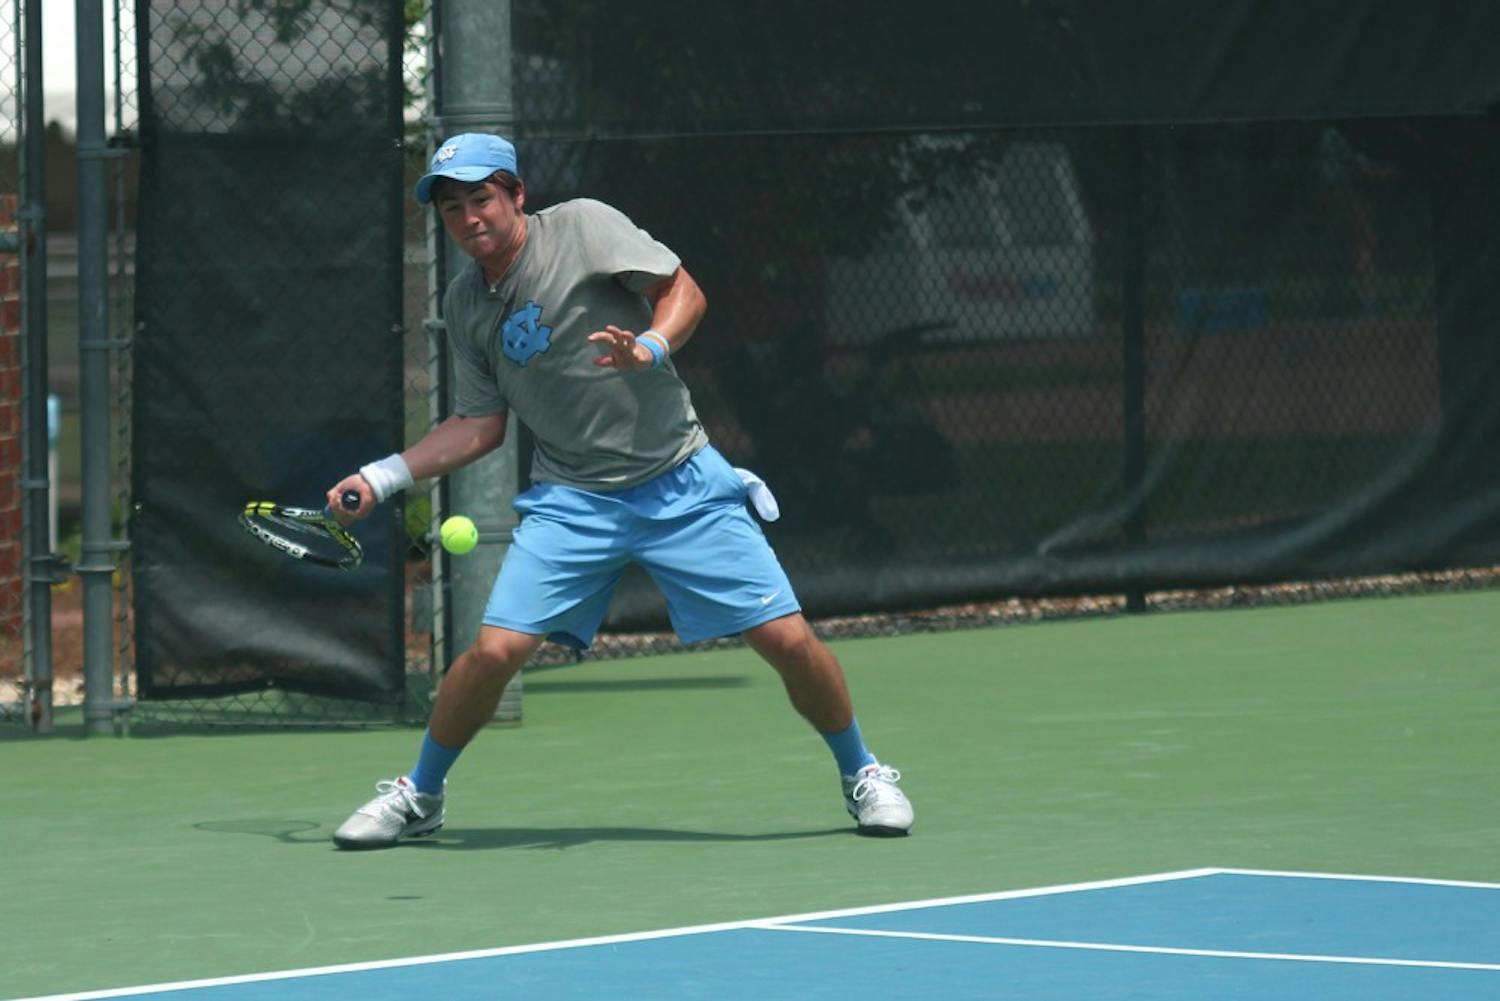 Ronnie Schneider returns the ball during the first round of the NCAA men's tennis tournament.